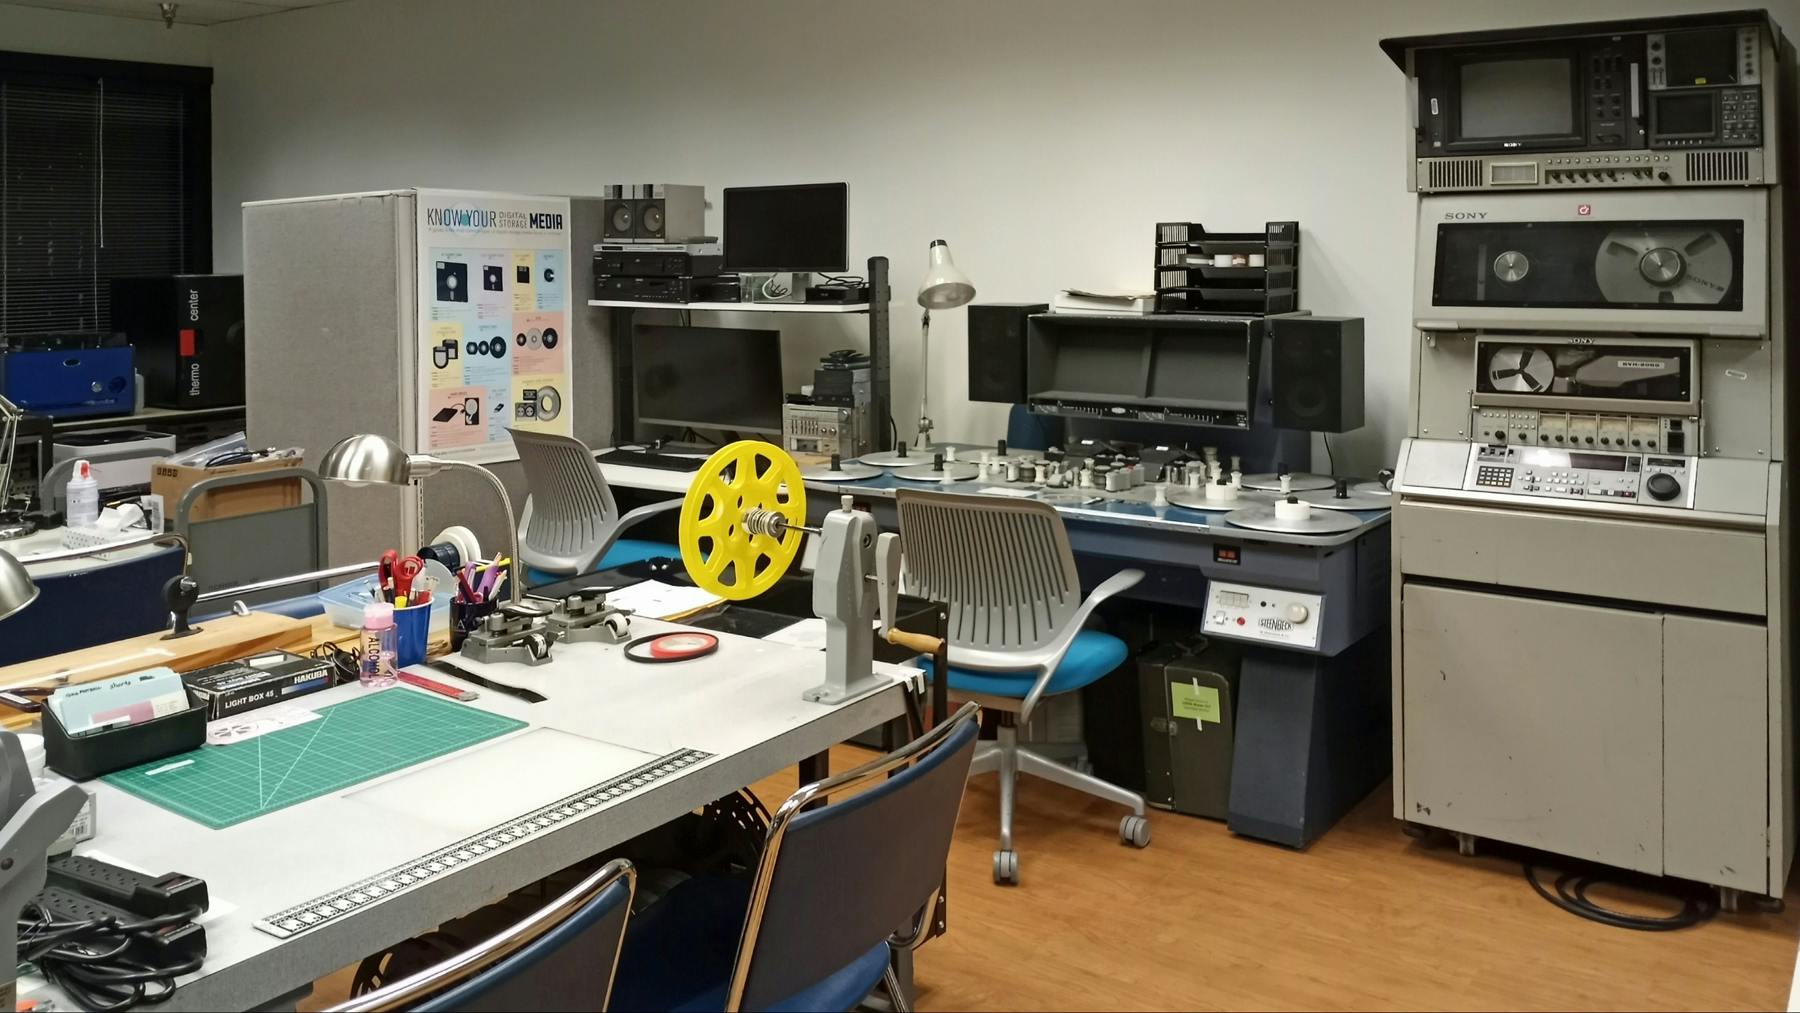 The UCLA IS Lab provides student access to equipment needed to learn preservation and archival skills.